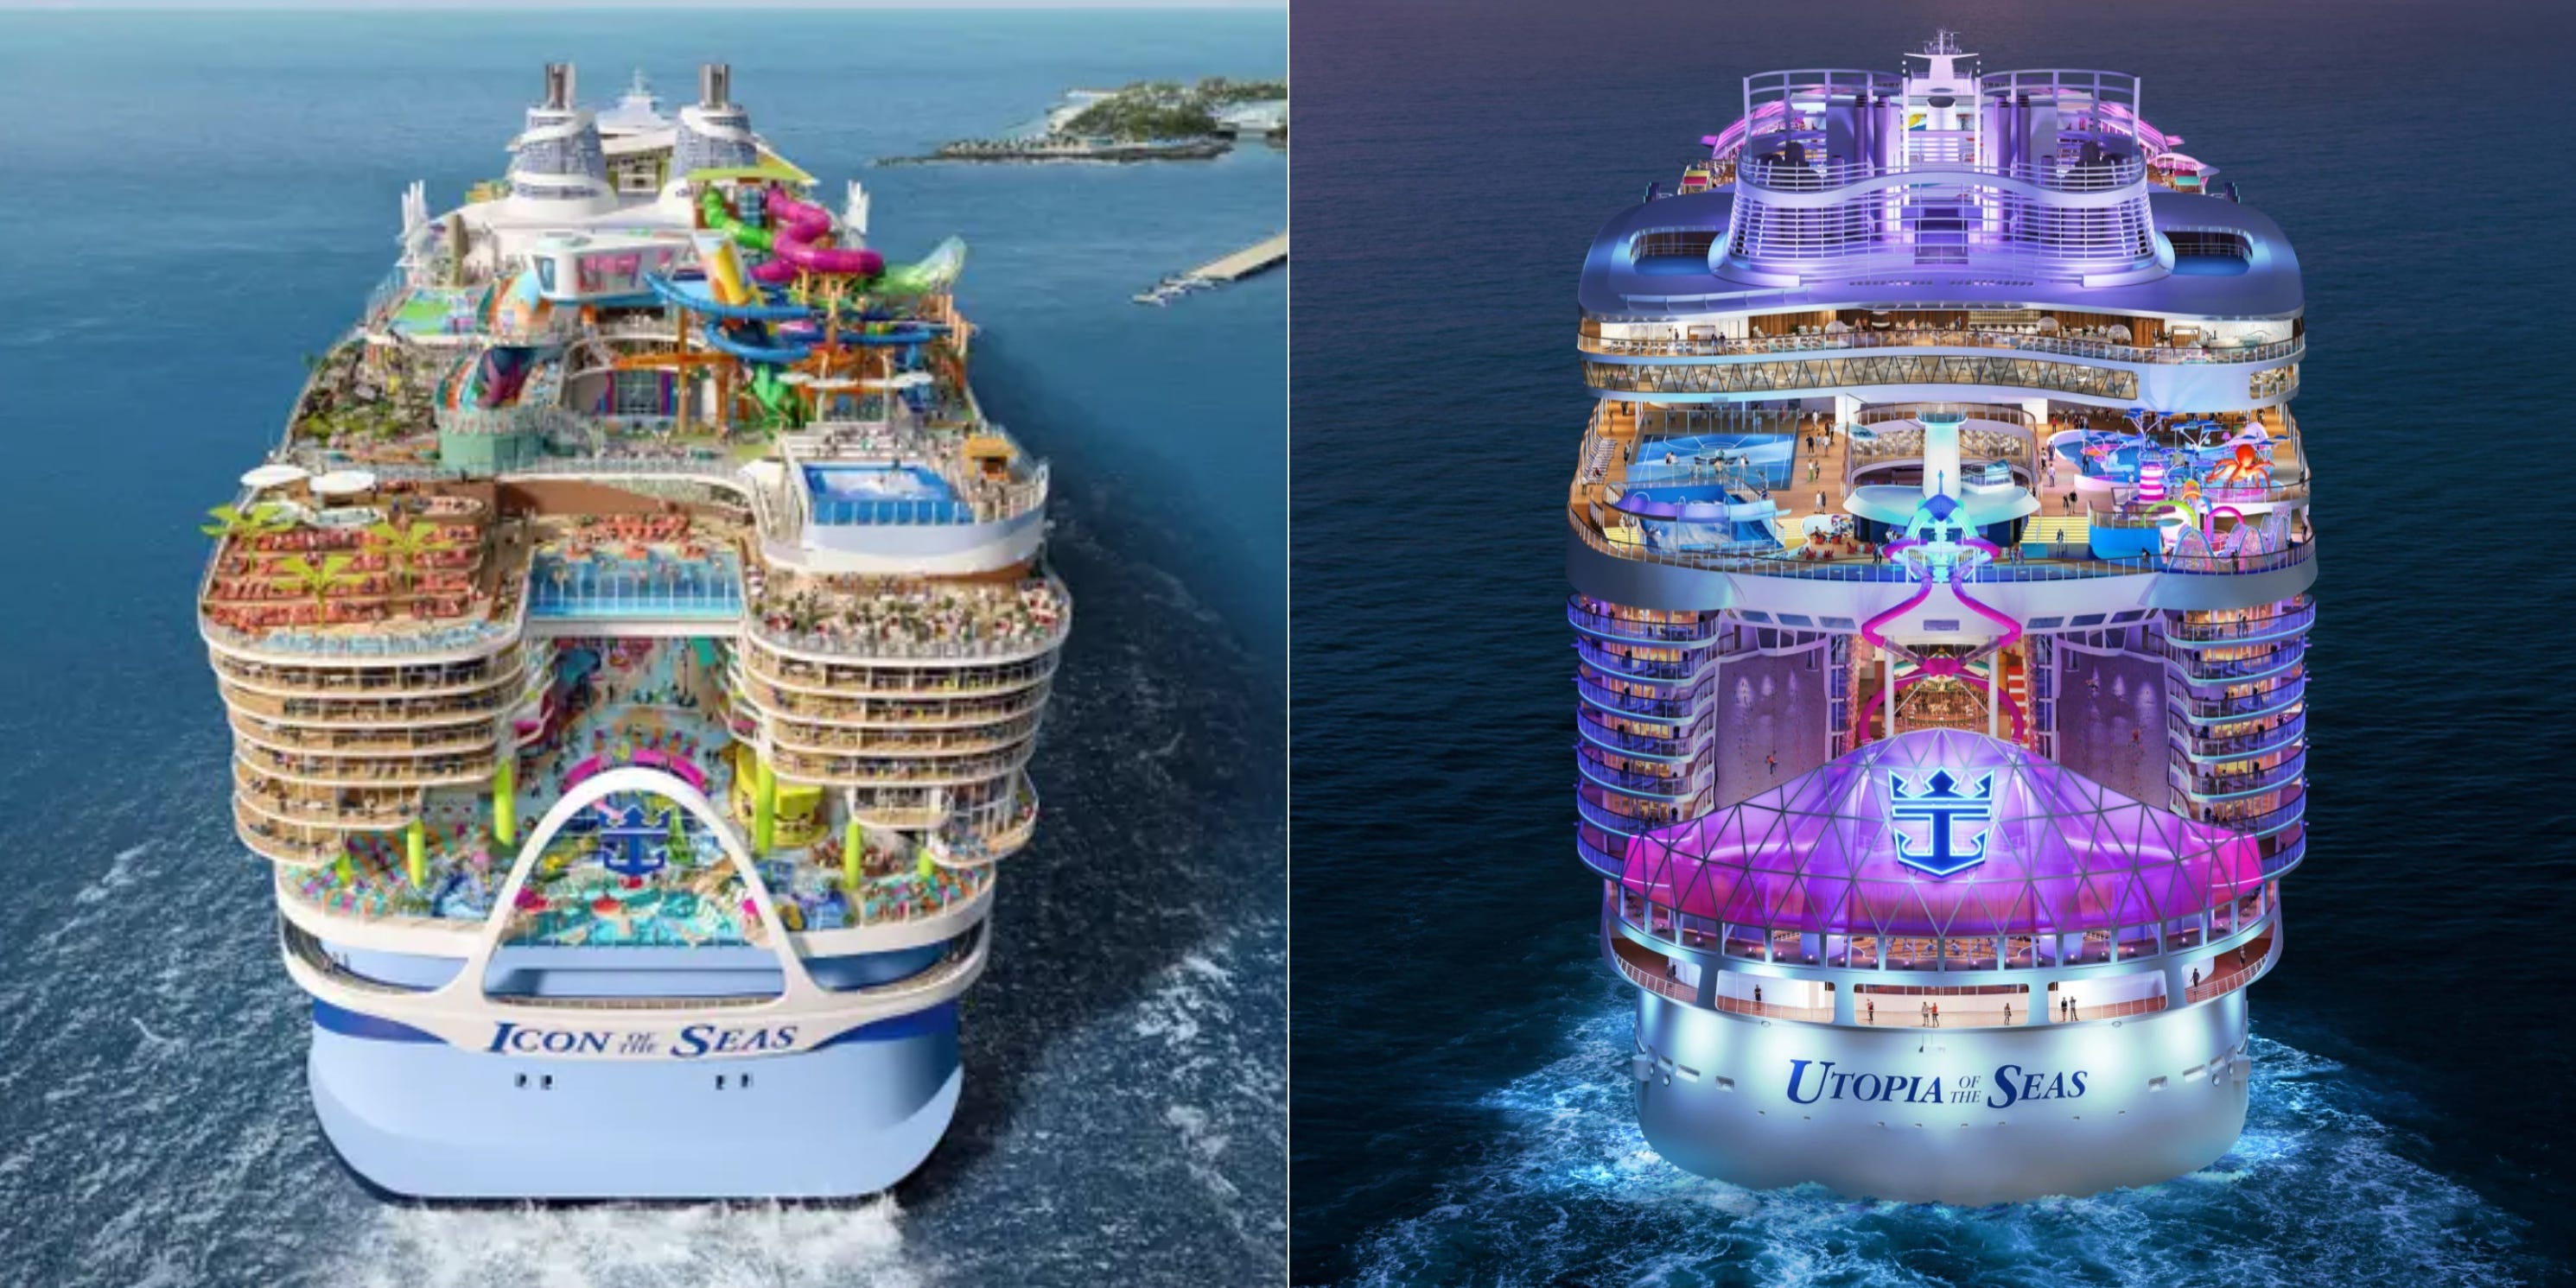 <p>But Utopia won't outgrow its enormous predecessor.</p><p>Icon is 1,198 feet long, 20 decks tall, and weighs 250,800 gross-tons. Utopia is set to be 10 feet stubbier, two decks shorter, and 13,940 gross-tons lighter. </p>